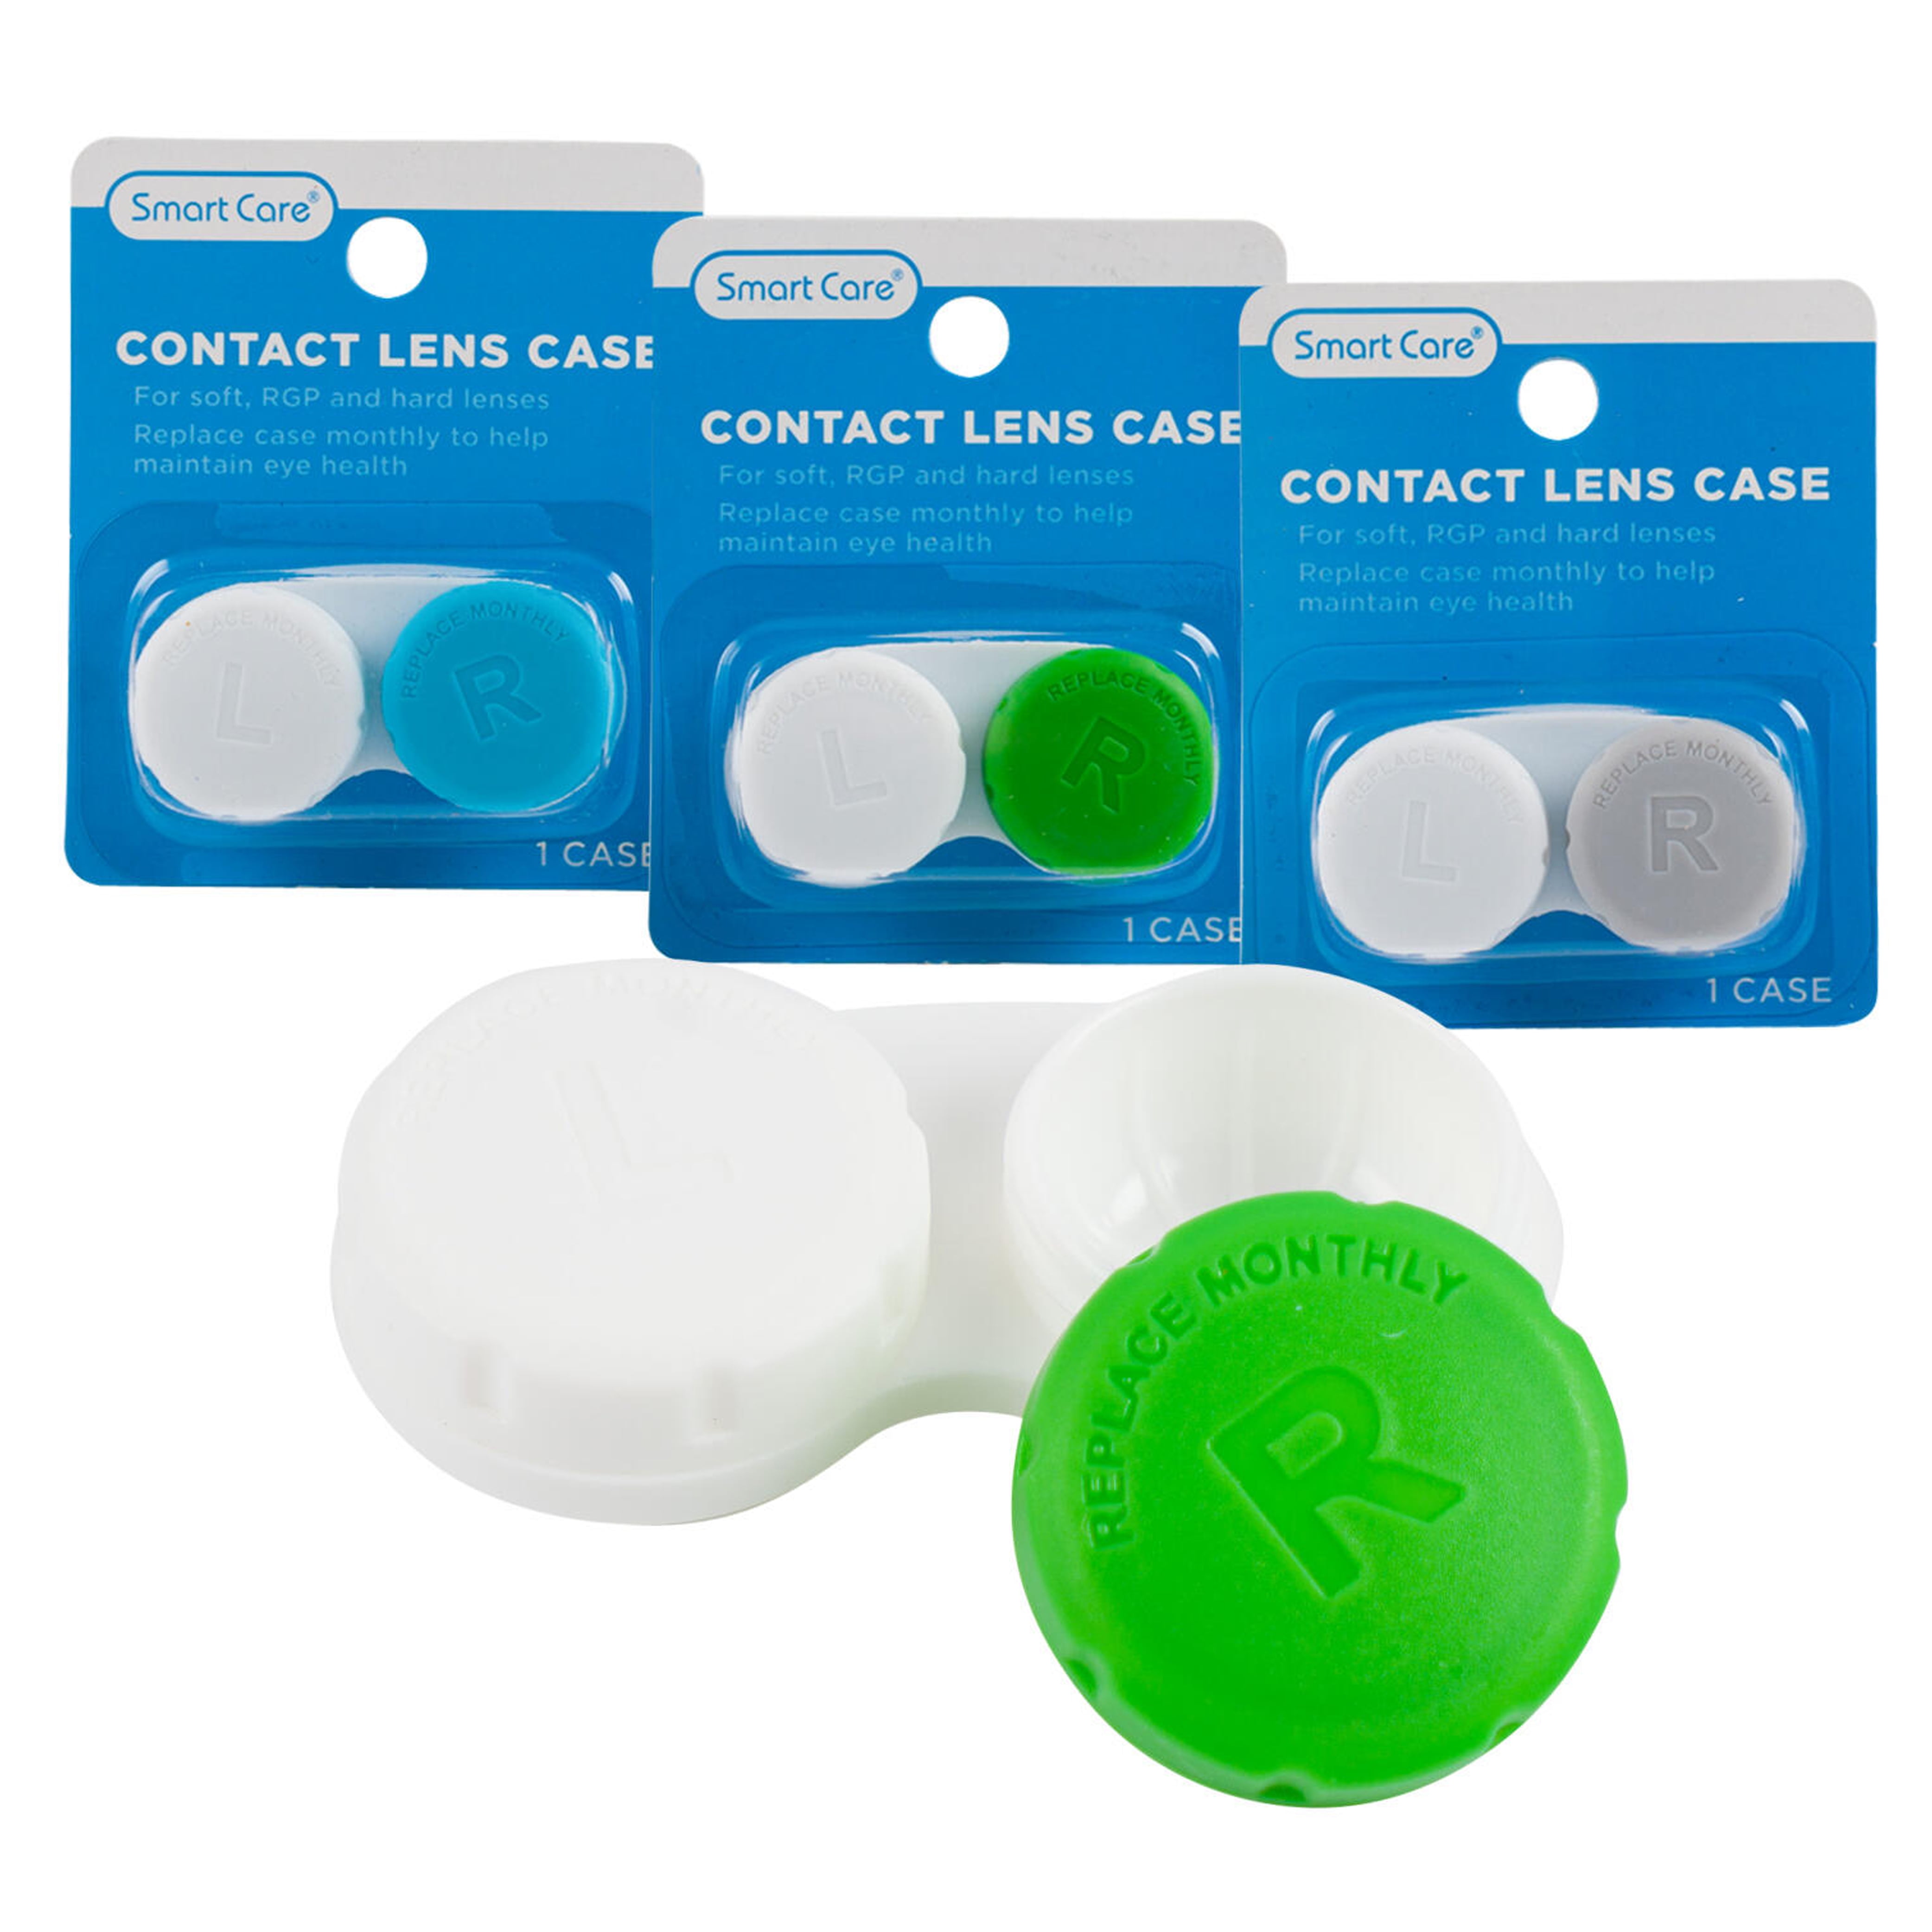 Mini Contact Lens Case L+R Cases Storage Holder Contact Lens Storage Boxes  Invisibility Glasses Nursing Bins Travel Accessories F3546 From  Candysong18, $0.2